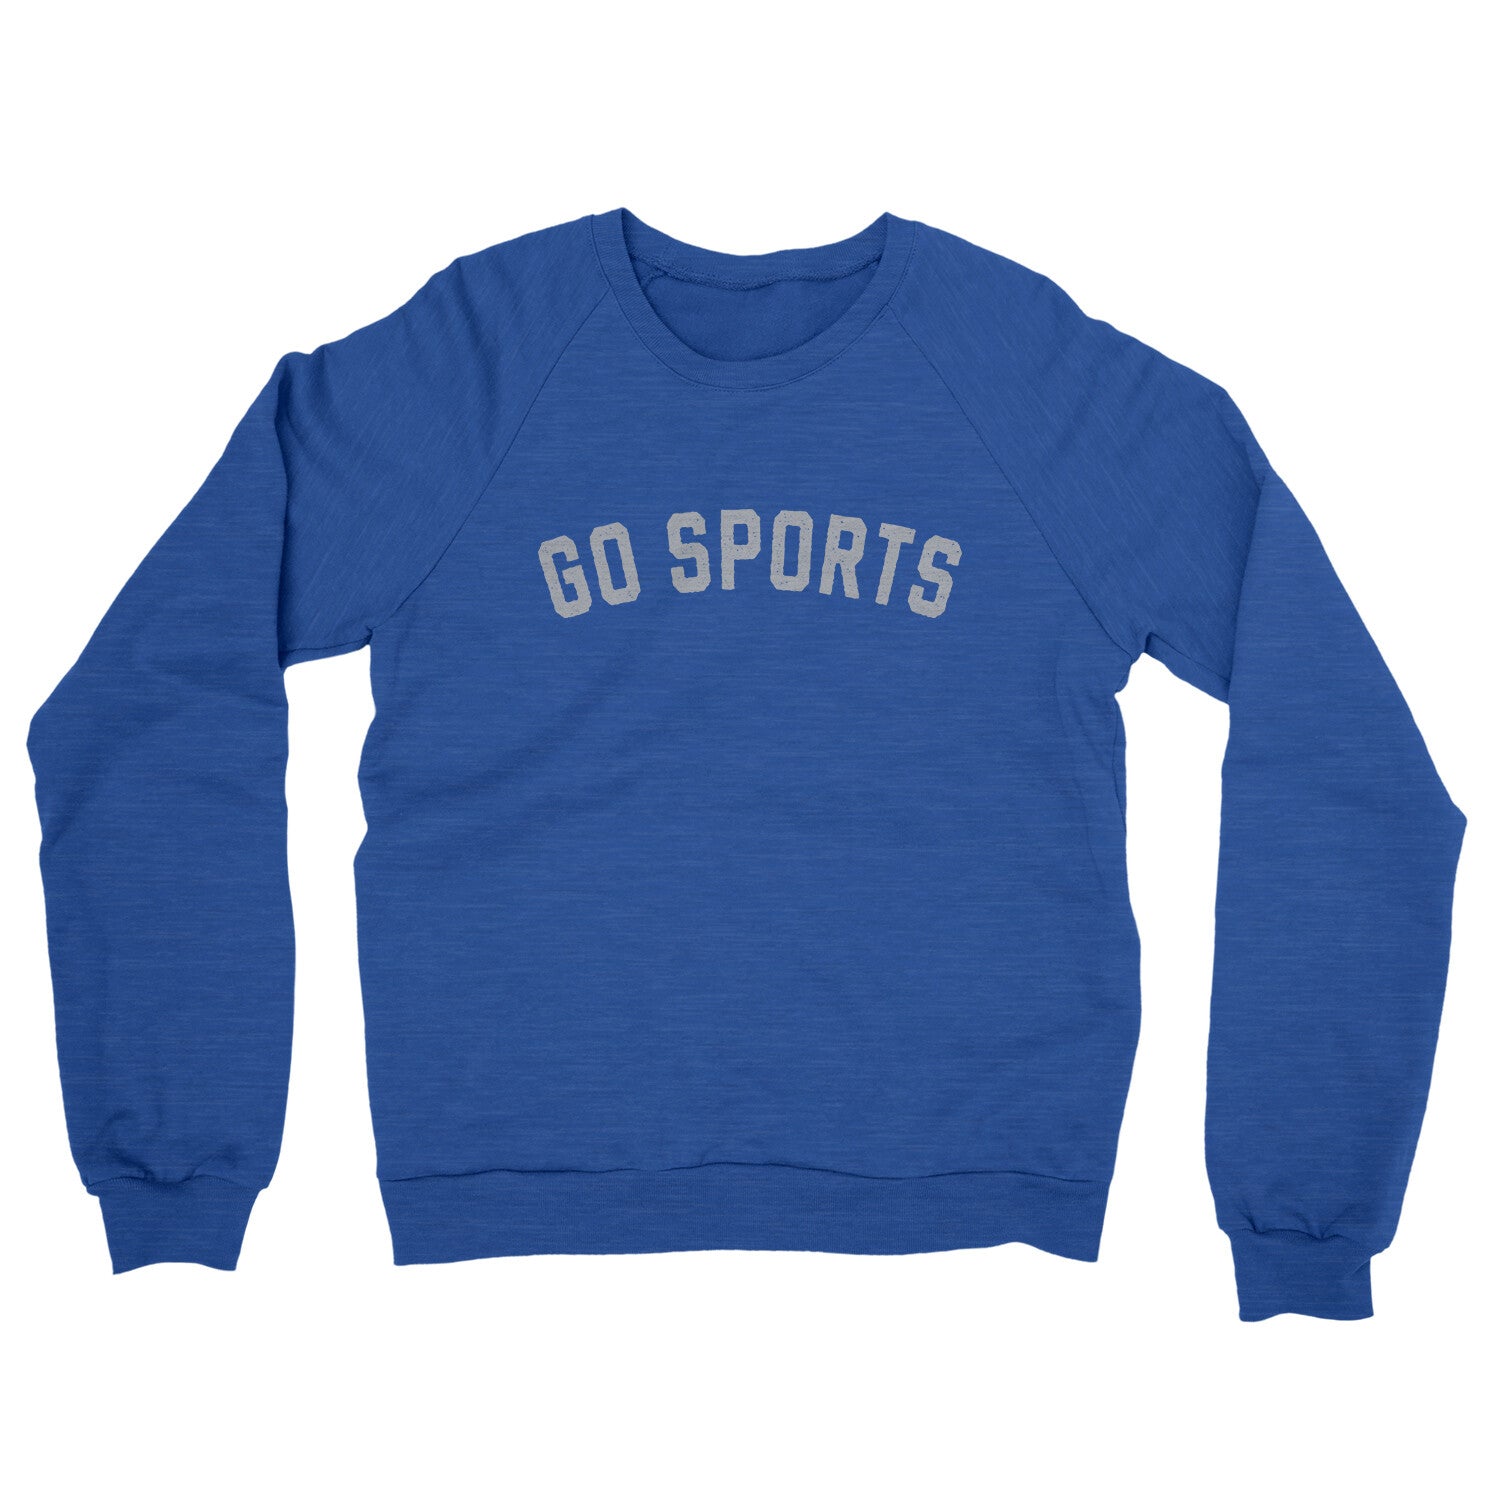 Go Sports in Heather Royal Color